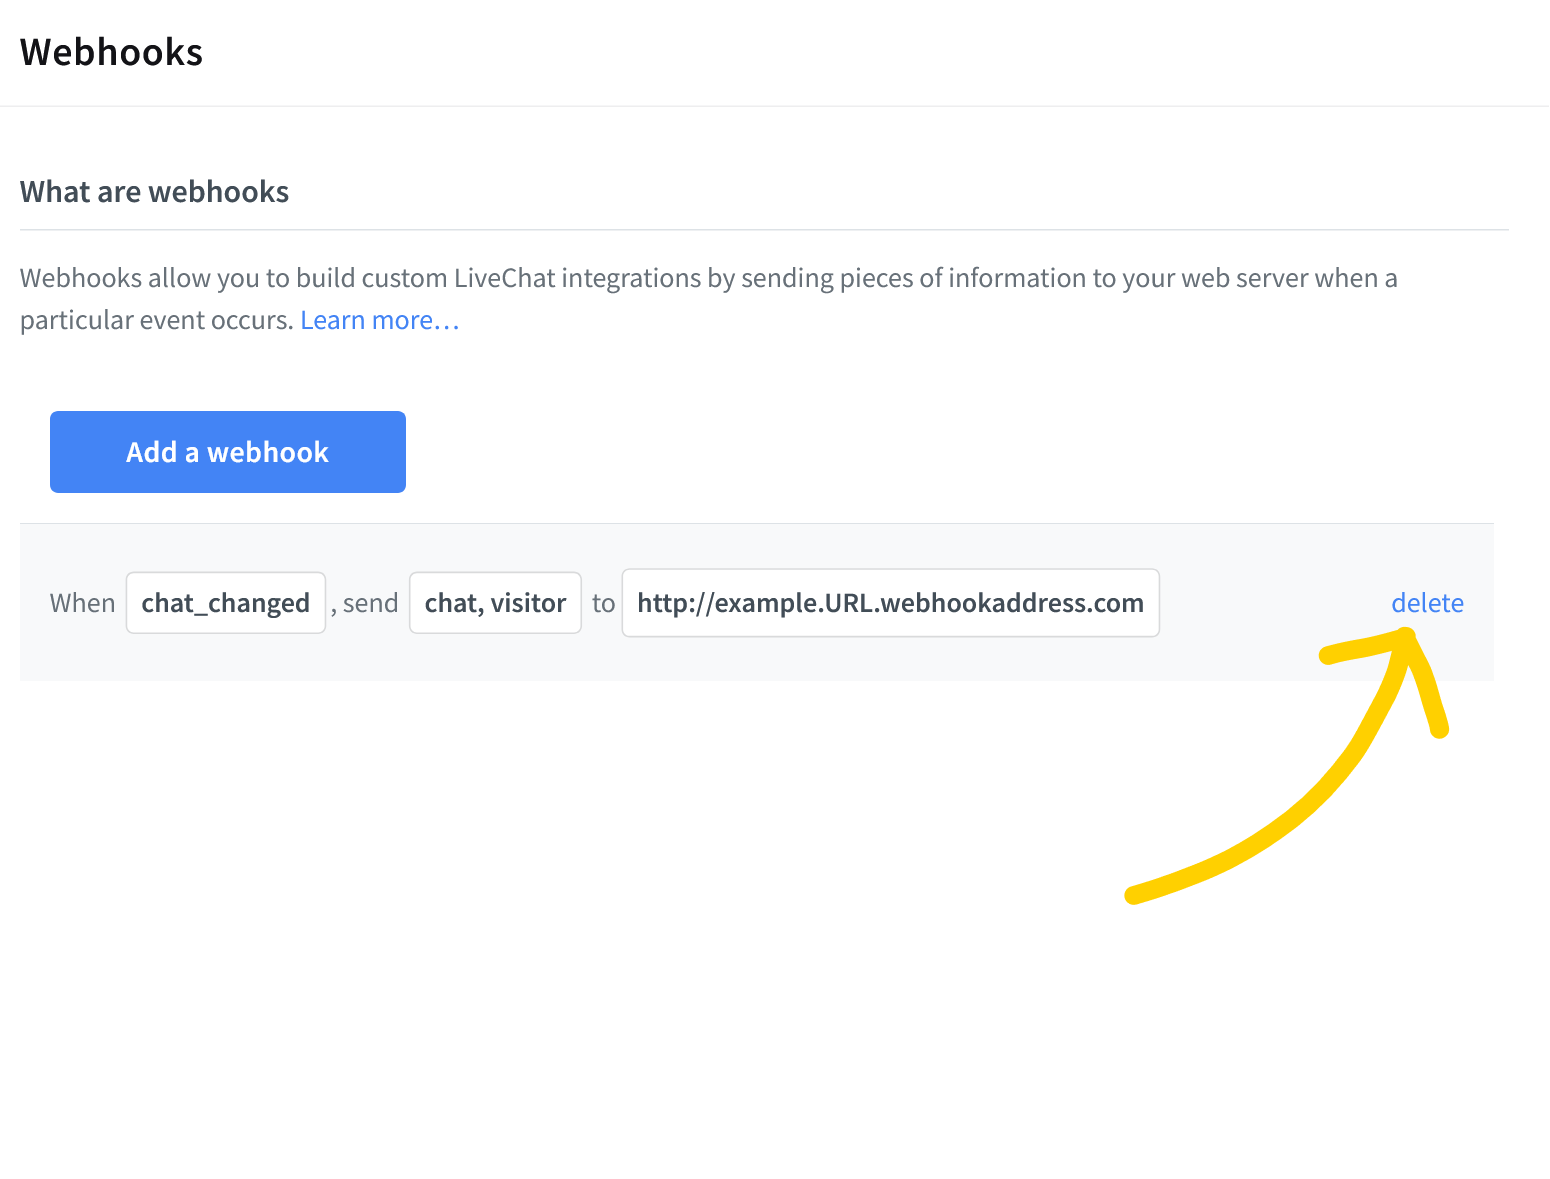 LiveChat HIPAA compliant: delete your webhook